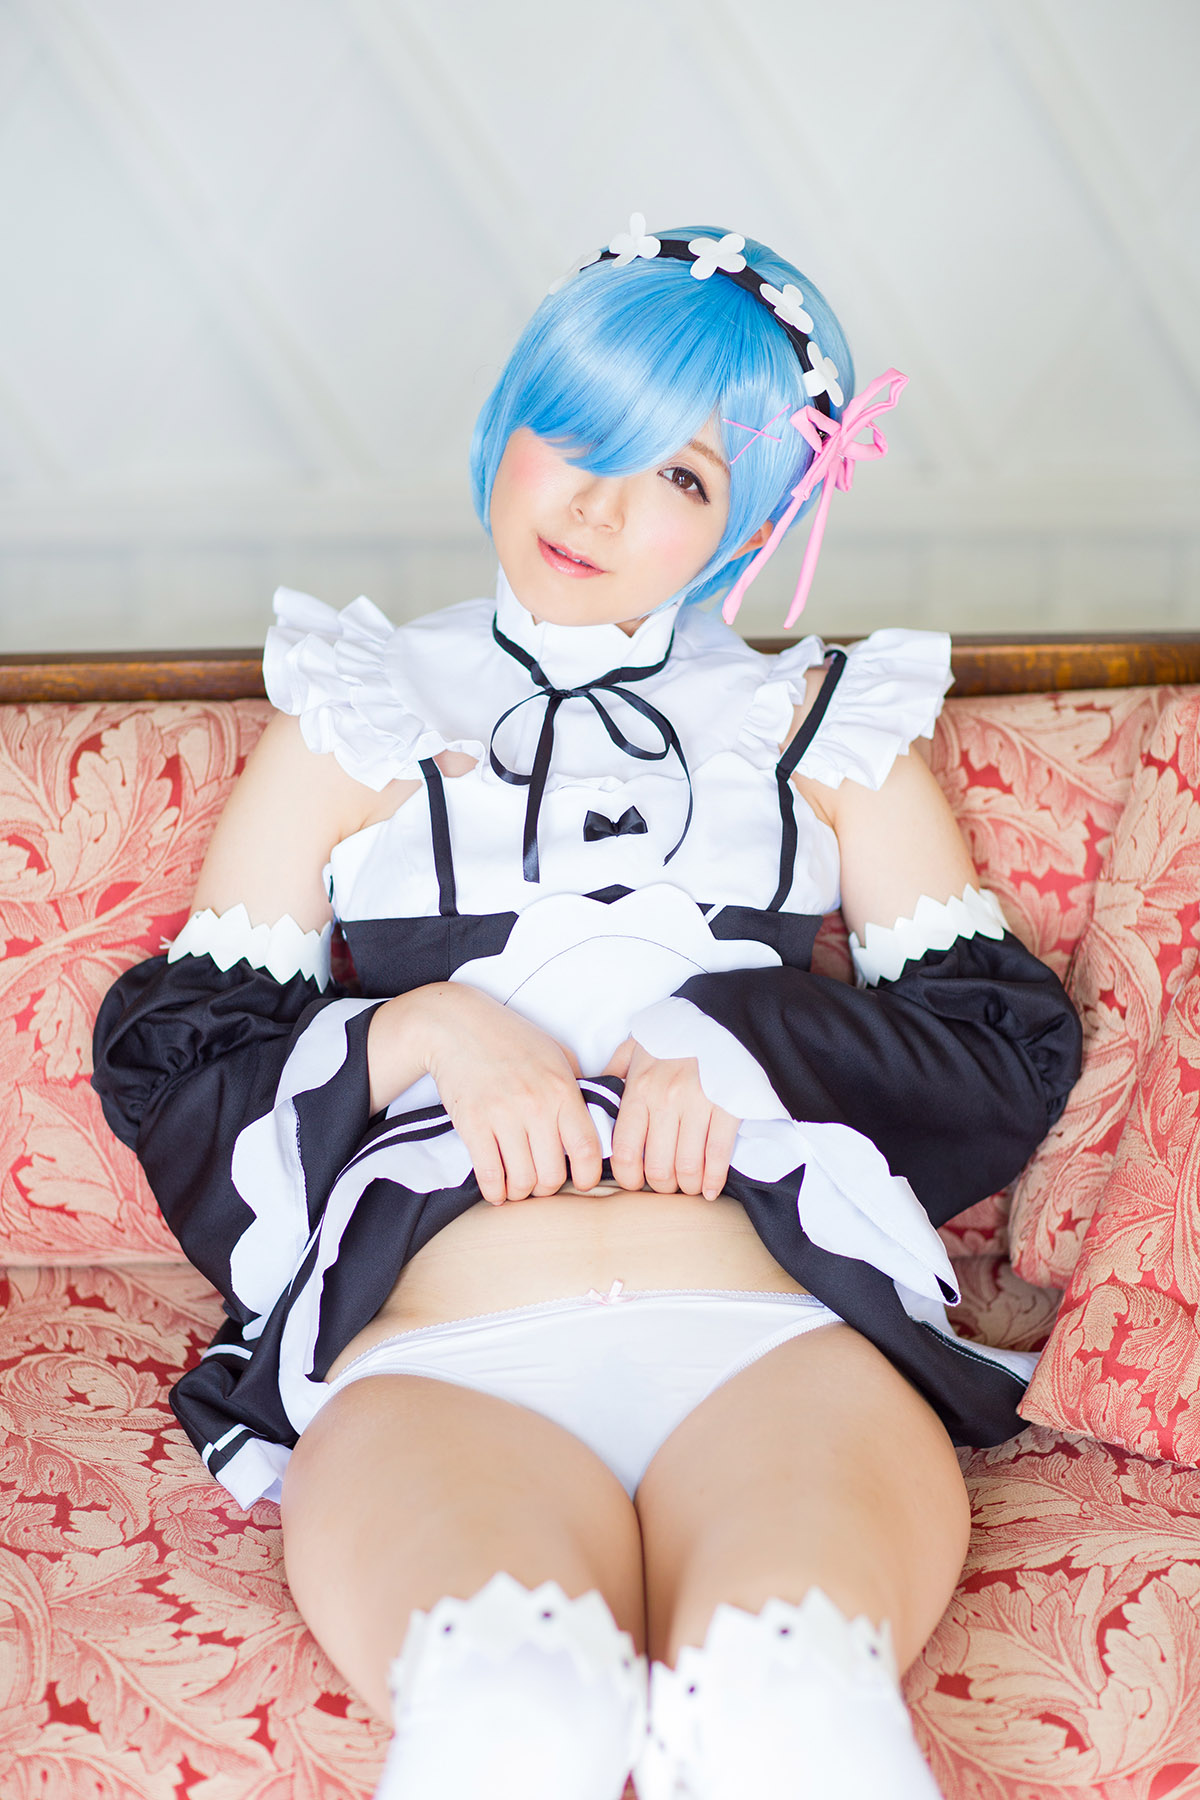 Charming Blue haired girl REM ero Cosplay maid in heaven(11)